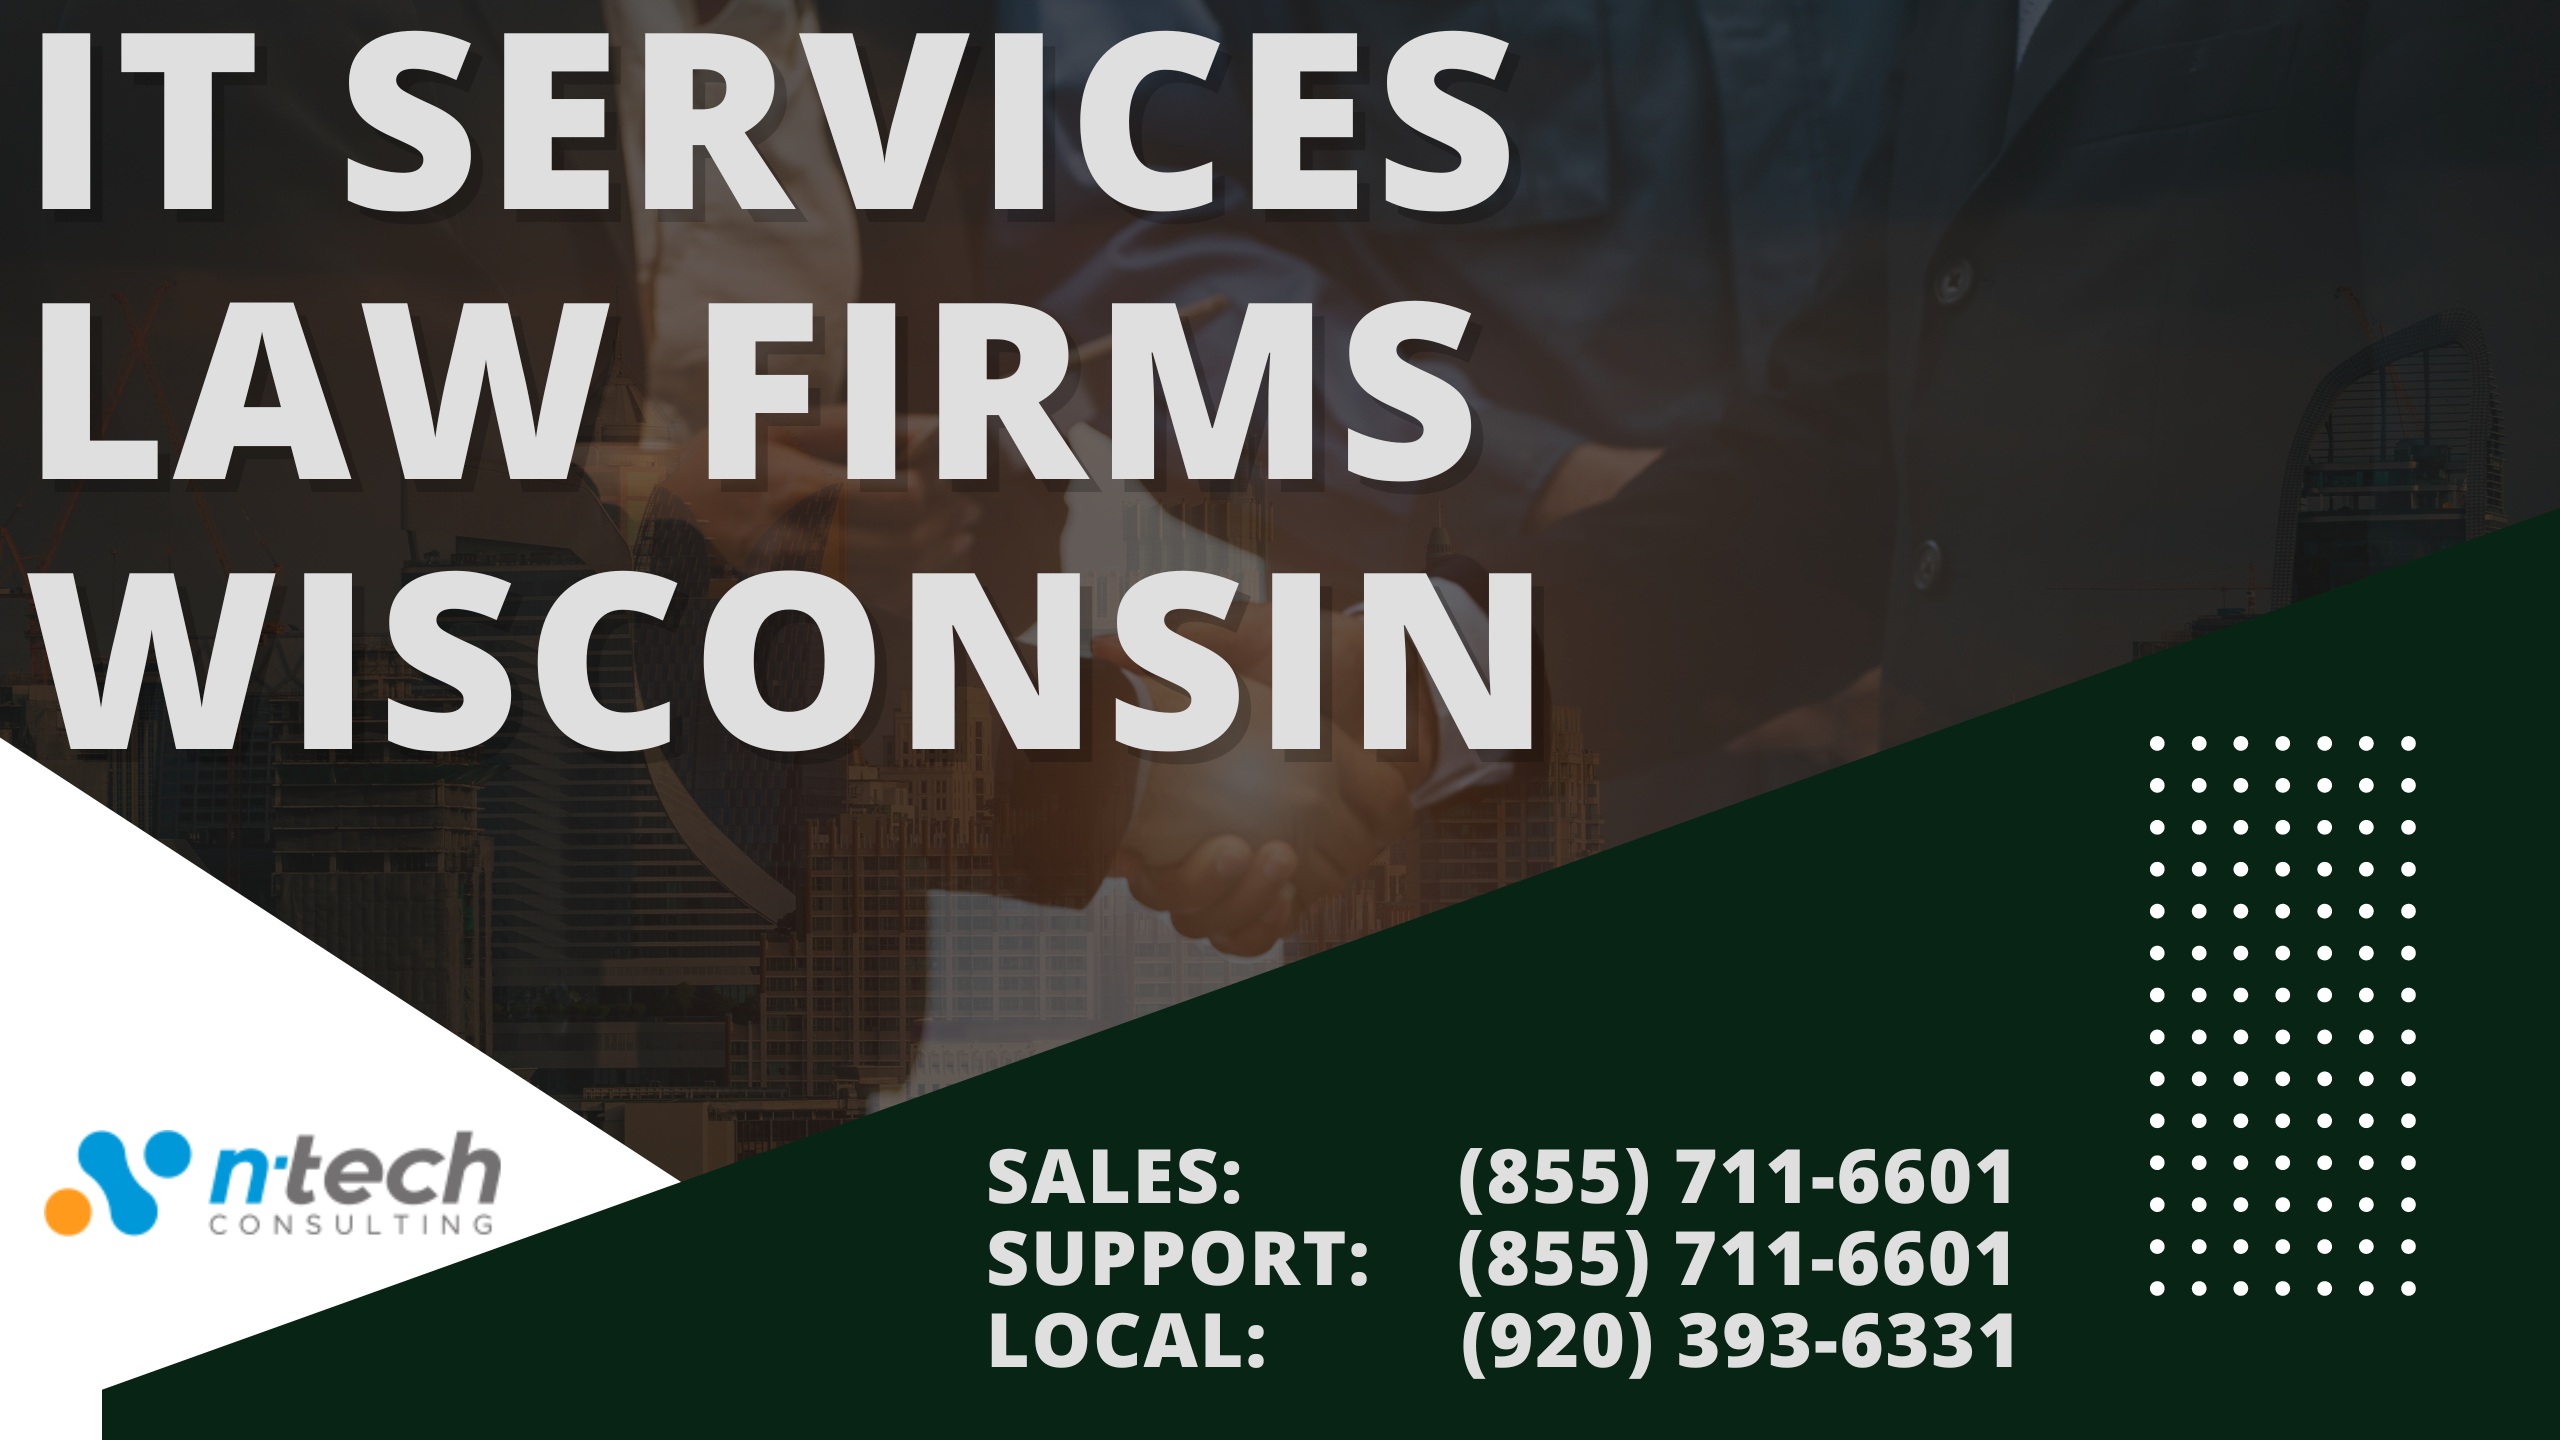 IT Services Law Firms Wisconsin